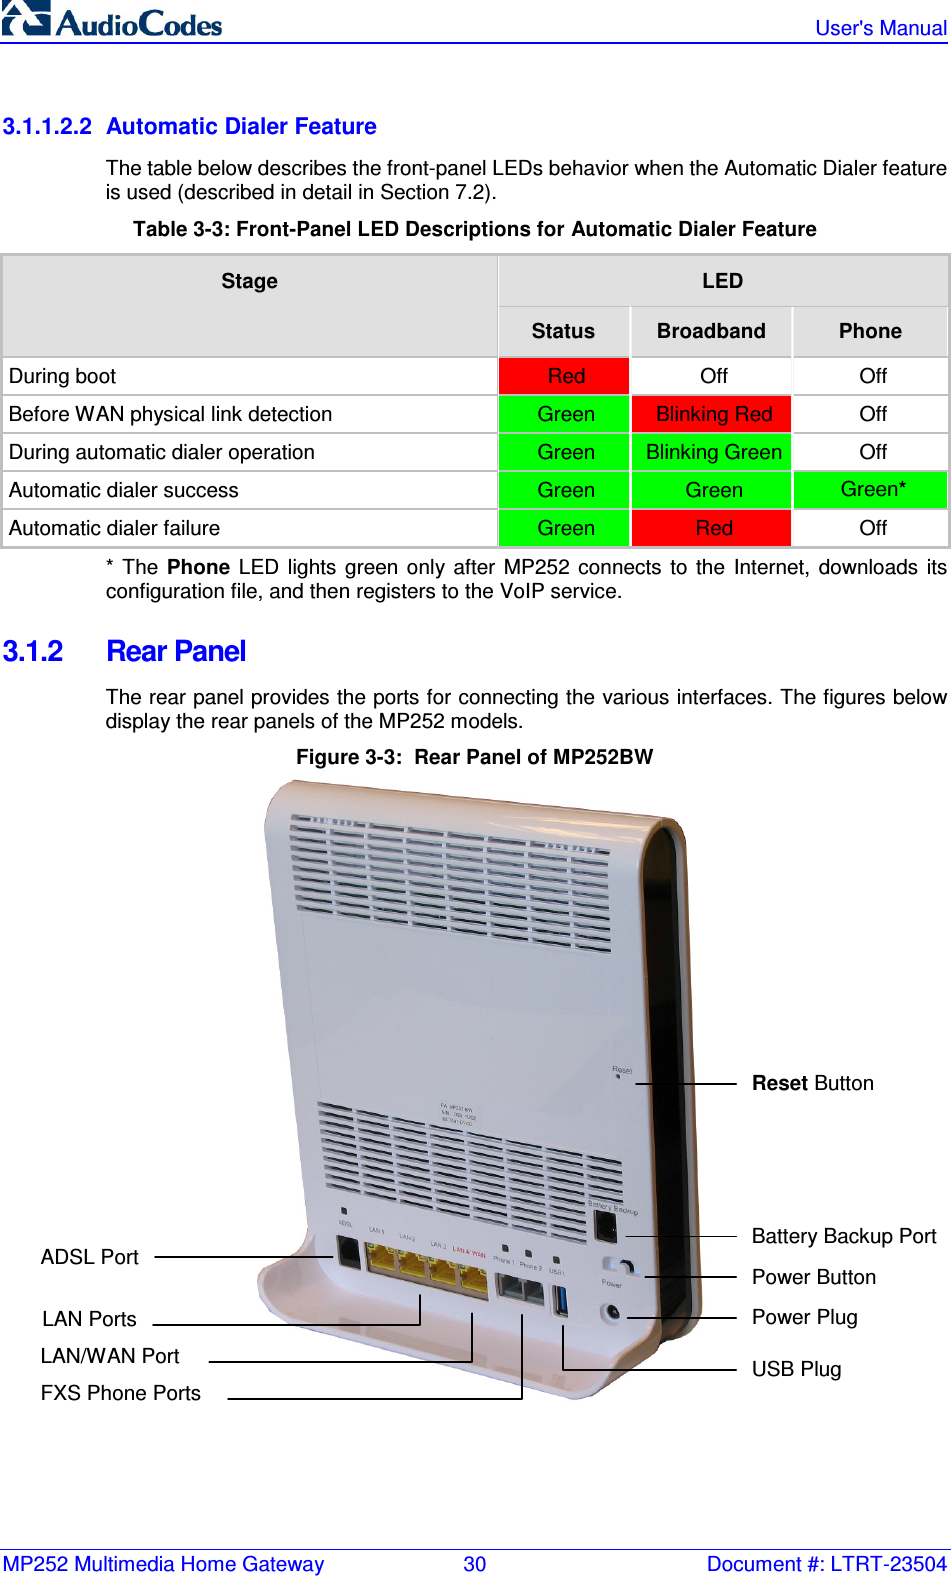 MP252 Multimedia Home Gateway  30  Document #: LTRT-23504   User&apos;s Manual 3.1.1.2.2  Automatic Dialer Feature The table below describes the front-panel LEDs behavior when the Automatic Dialer feature is used (described in detail in Section 7.2). Table 3-3: Front-Panel LED Descriptions for Automatic Dialer Feature LED Stage Status  Broadband  Phone During boot Red  Off  Off Before WAN physical link detection Green  Blinking Red Off During automatic dialer operation Green  Blinking Green Off Automatic dialer success Green  Green  Green* Automatic dialer failure  Green  Red  Off *  The  Phone  LED  lights  green  only  after  MP252  connects  to  the  Internet,  downloads  its configuration file, and then registers to the VoIP service. 3.1.2  Rear Panel The rear panel provides the ports for connecting the various interfaces. The figures below display the rear panels of the MP252 models. Figure 3-3:  Rear Panel of MP252BW    Reset Button Battery Backup Port Power Plug FXS Phone Ports LAN/WAN Port ADSL Port LAN Ports USB Plug Power Button 